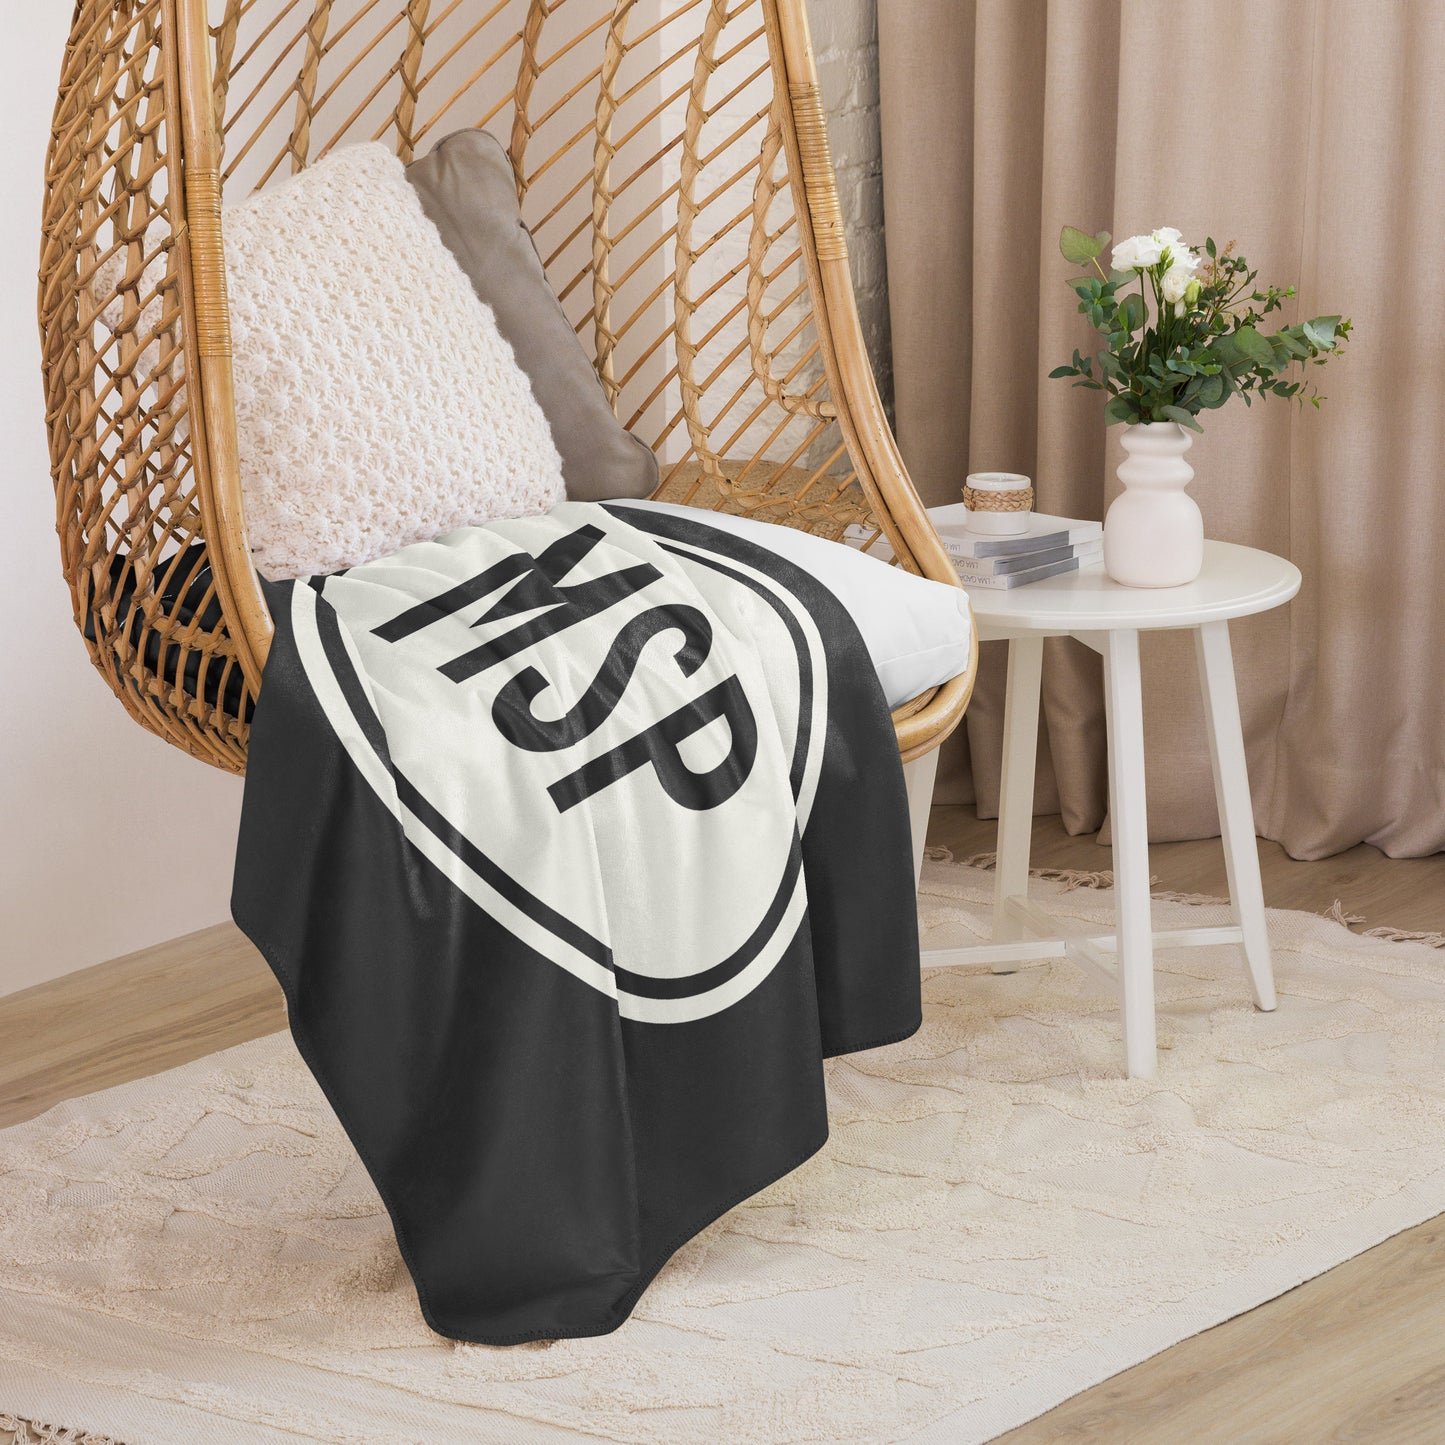 Unique Travel Gift Sherpa Blanket - White Oval • MSP Minneapolis • YHM Designs - Image 06